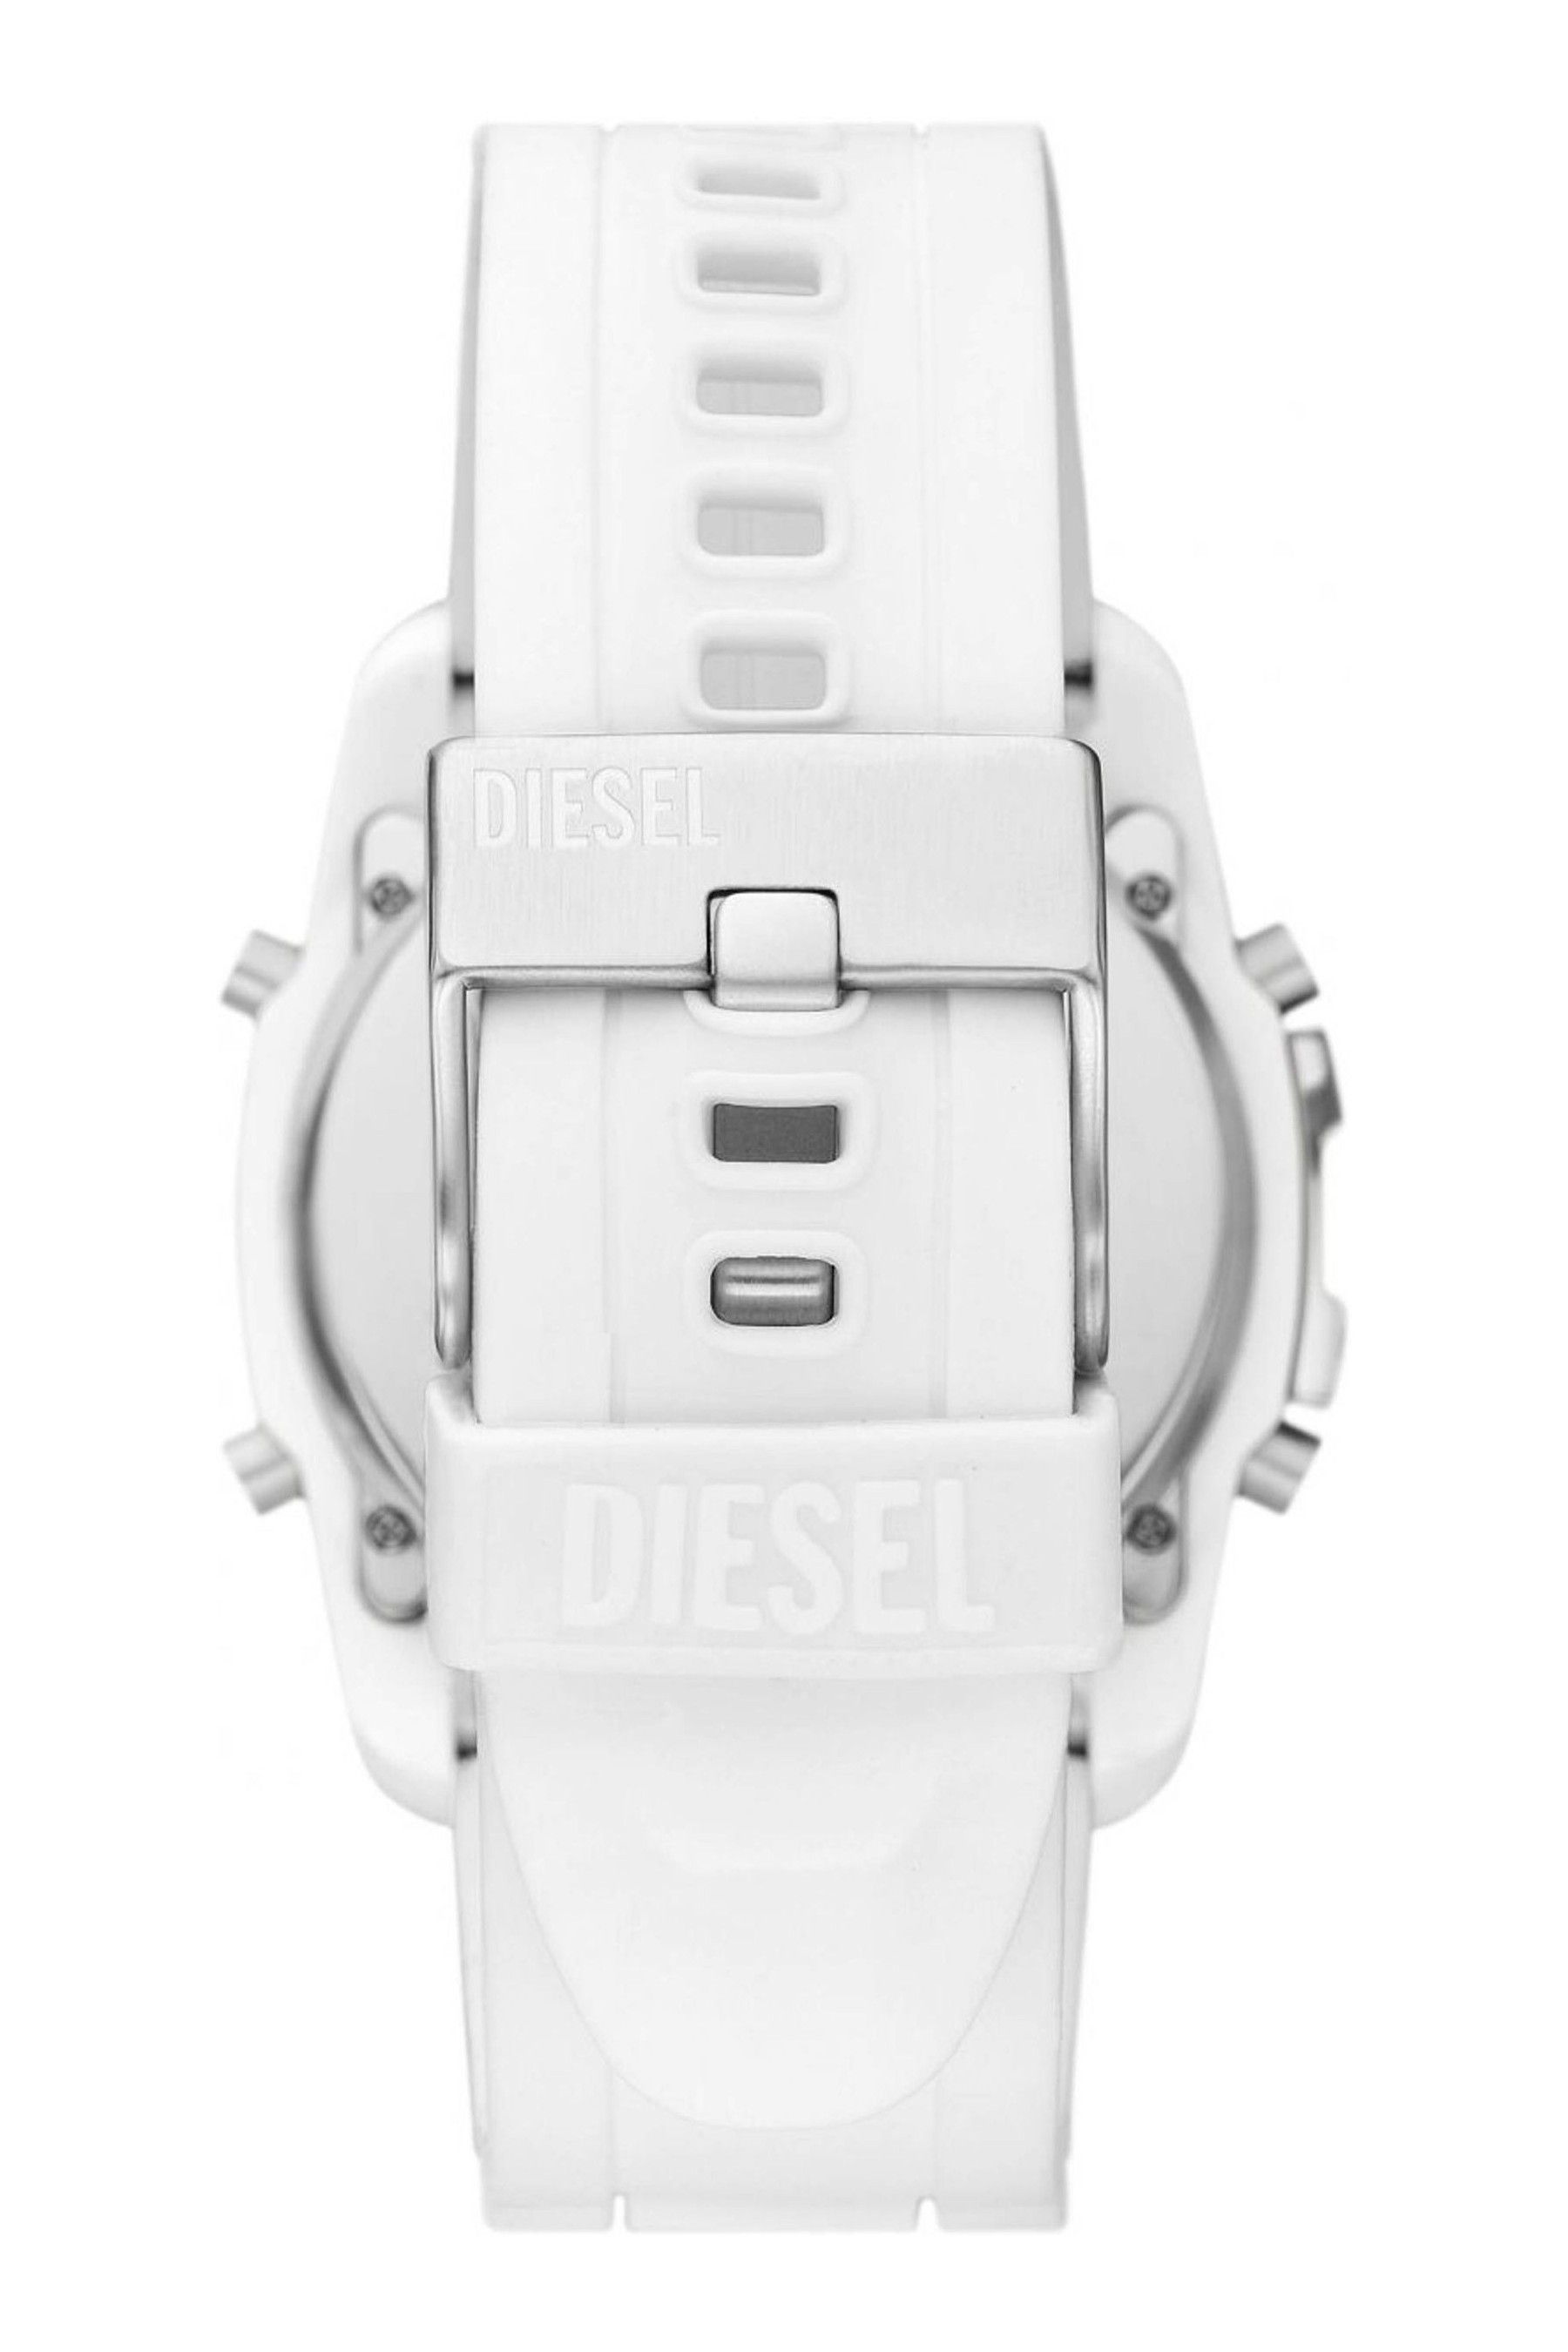 Buy Diesel Gents White Watch from the Next UK online shop